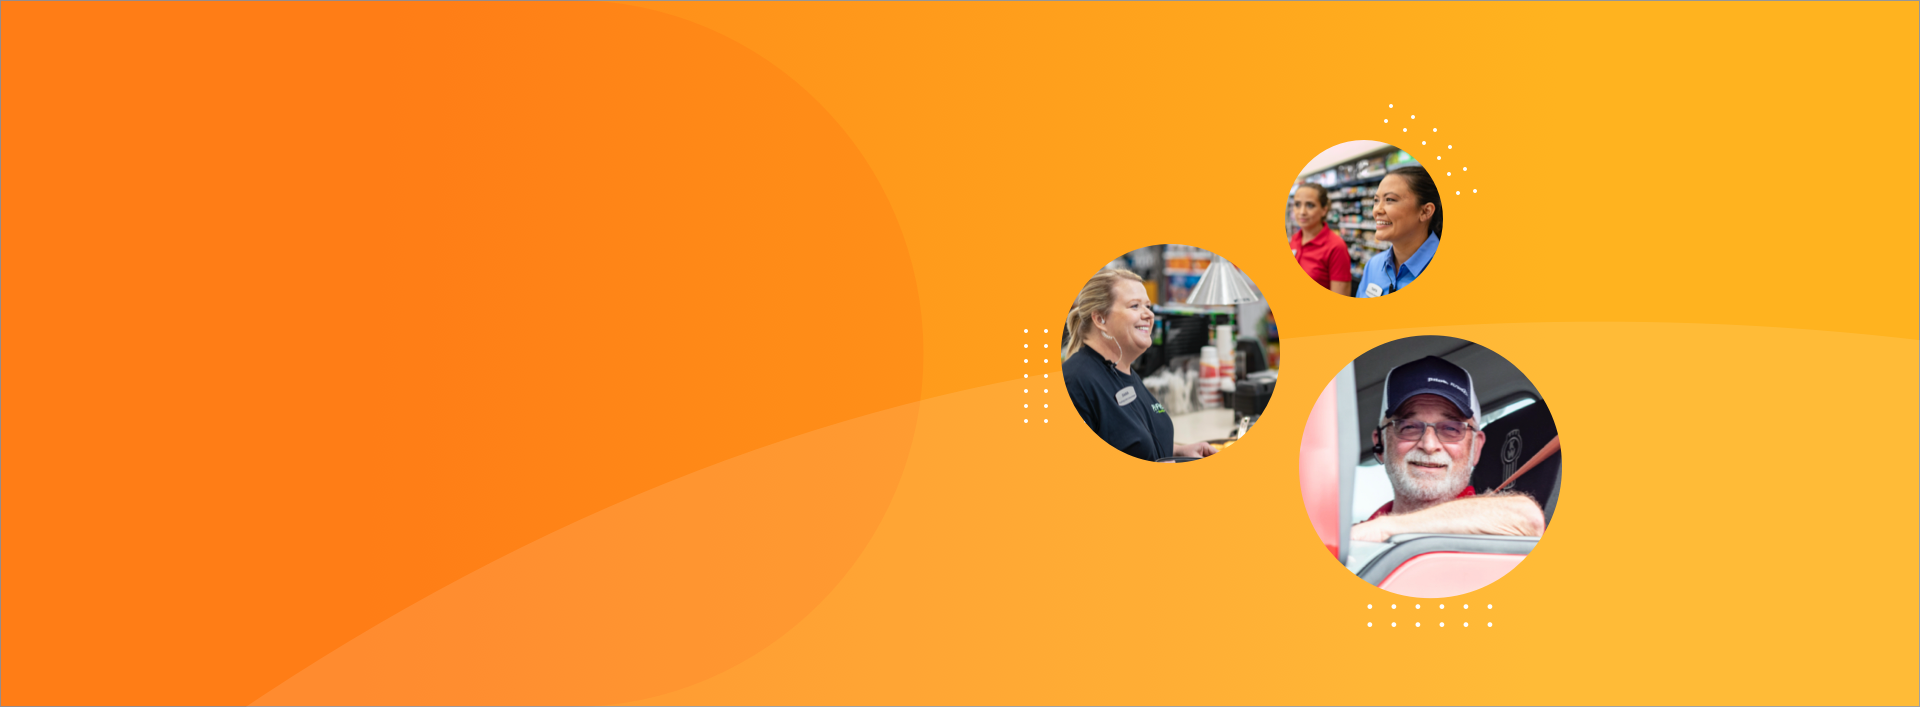 Orange and yellow background with 3 circle images of employees